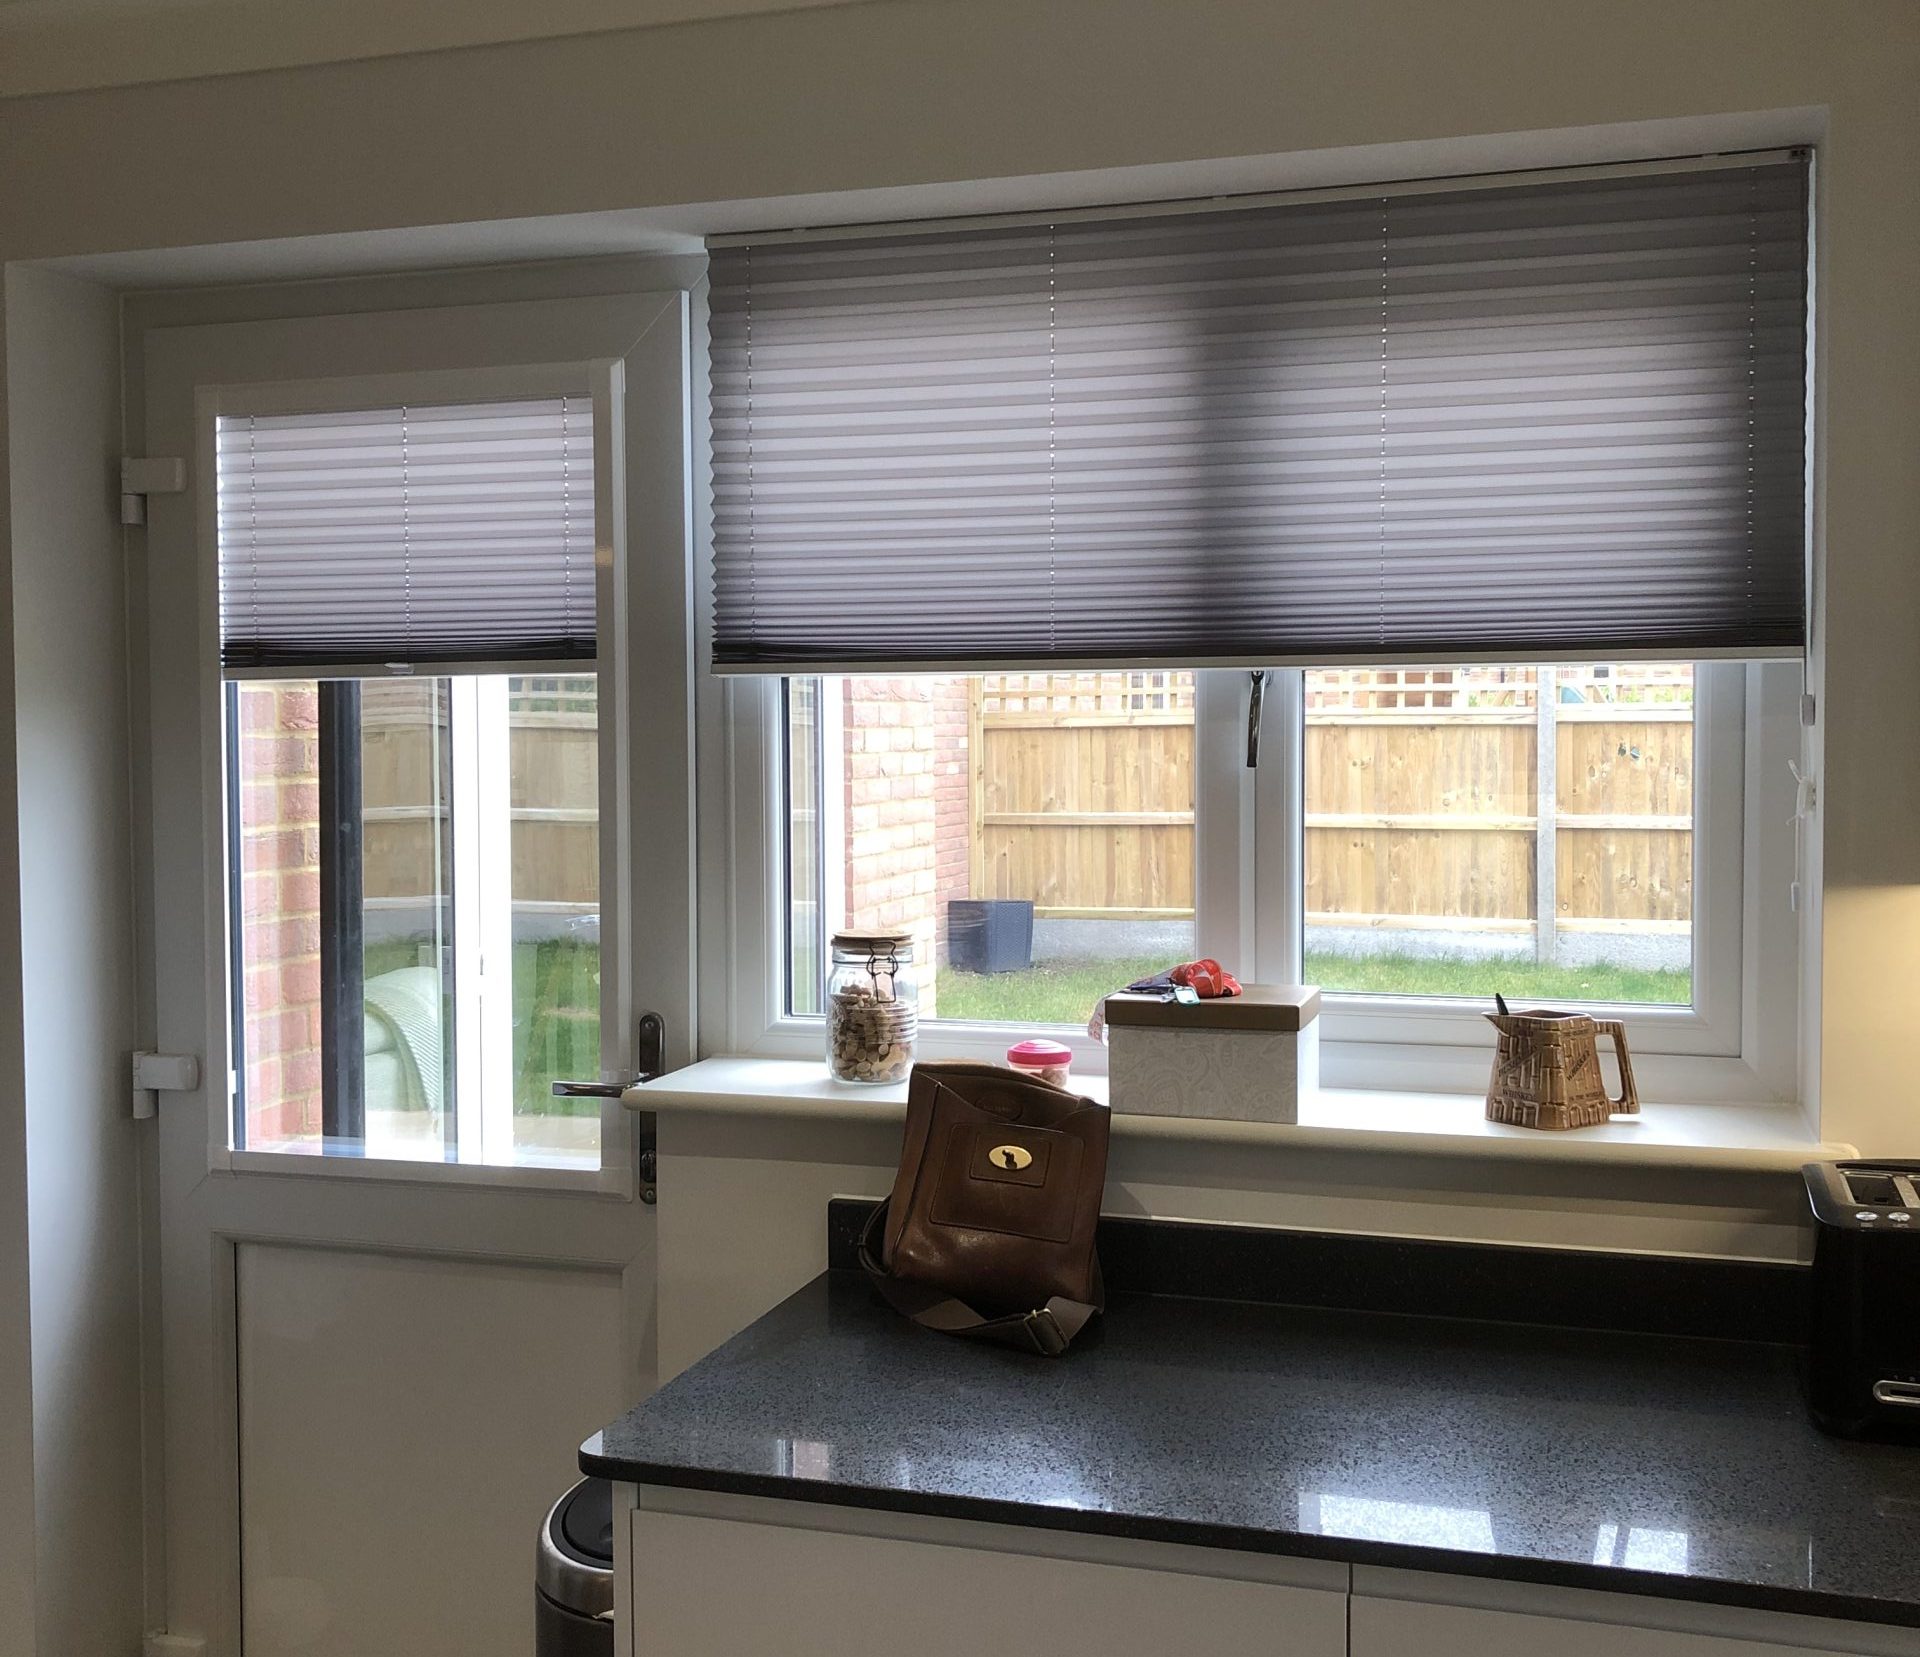 Bespoke Blinds from Elite Blinds and Shutters